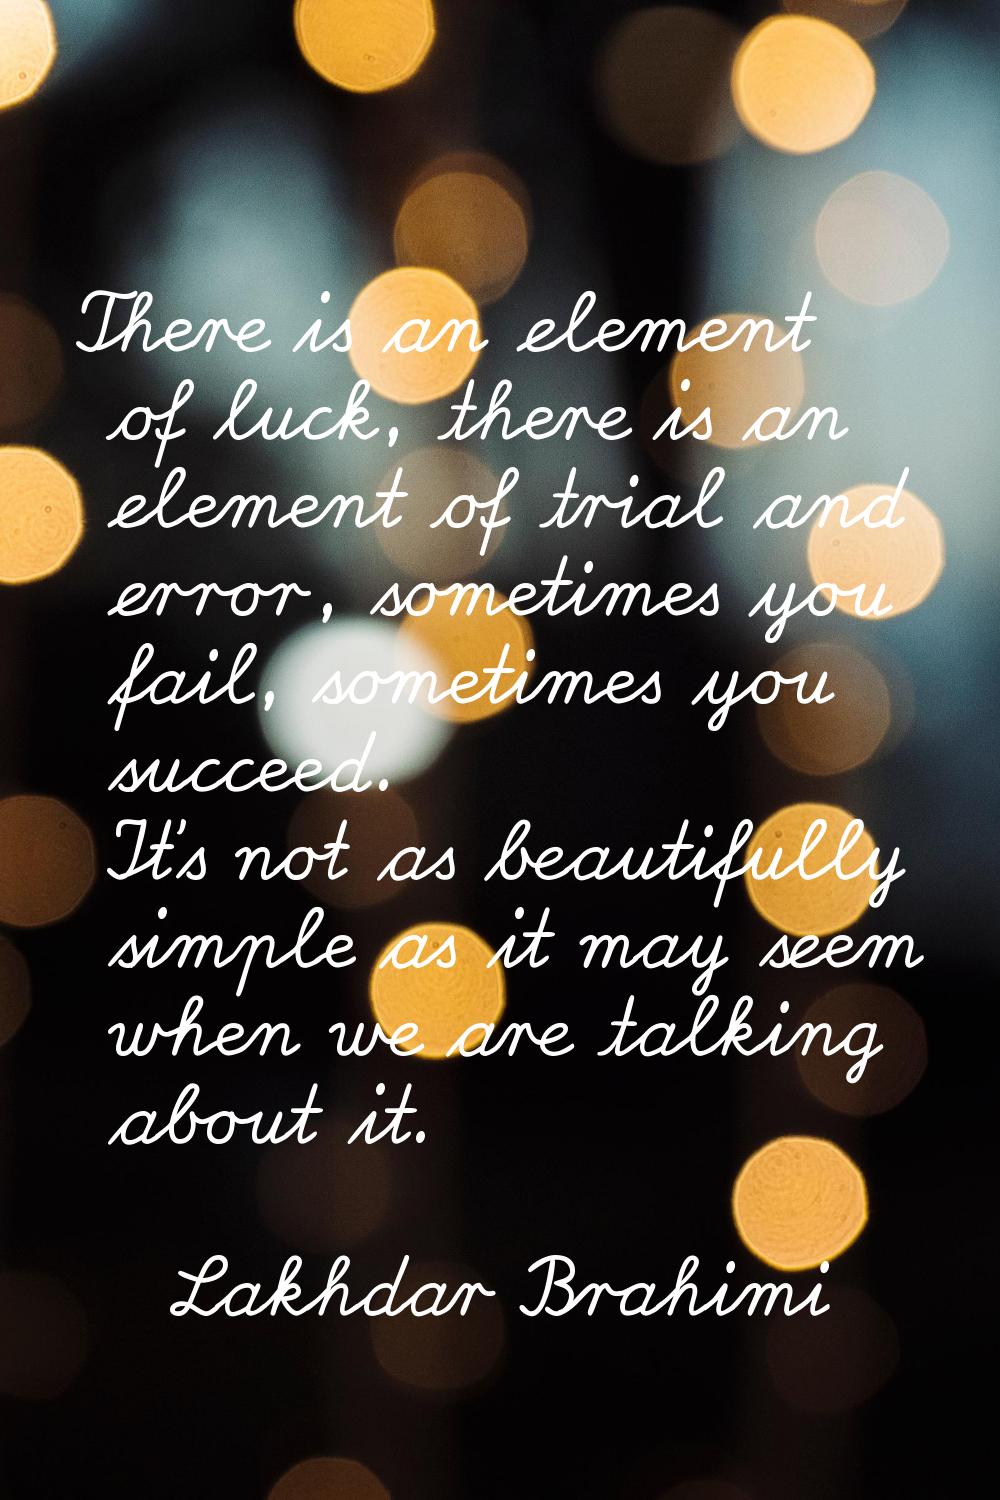 There is an element of luck, there is an element of trial and error, sometimes you fail, sometimes 